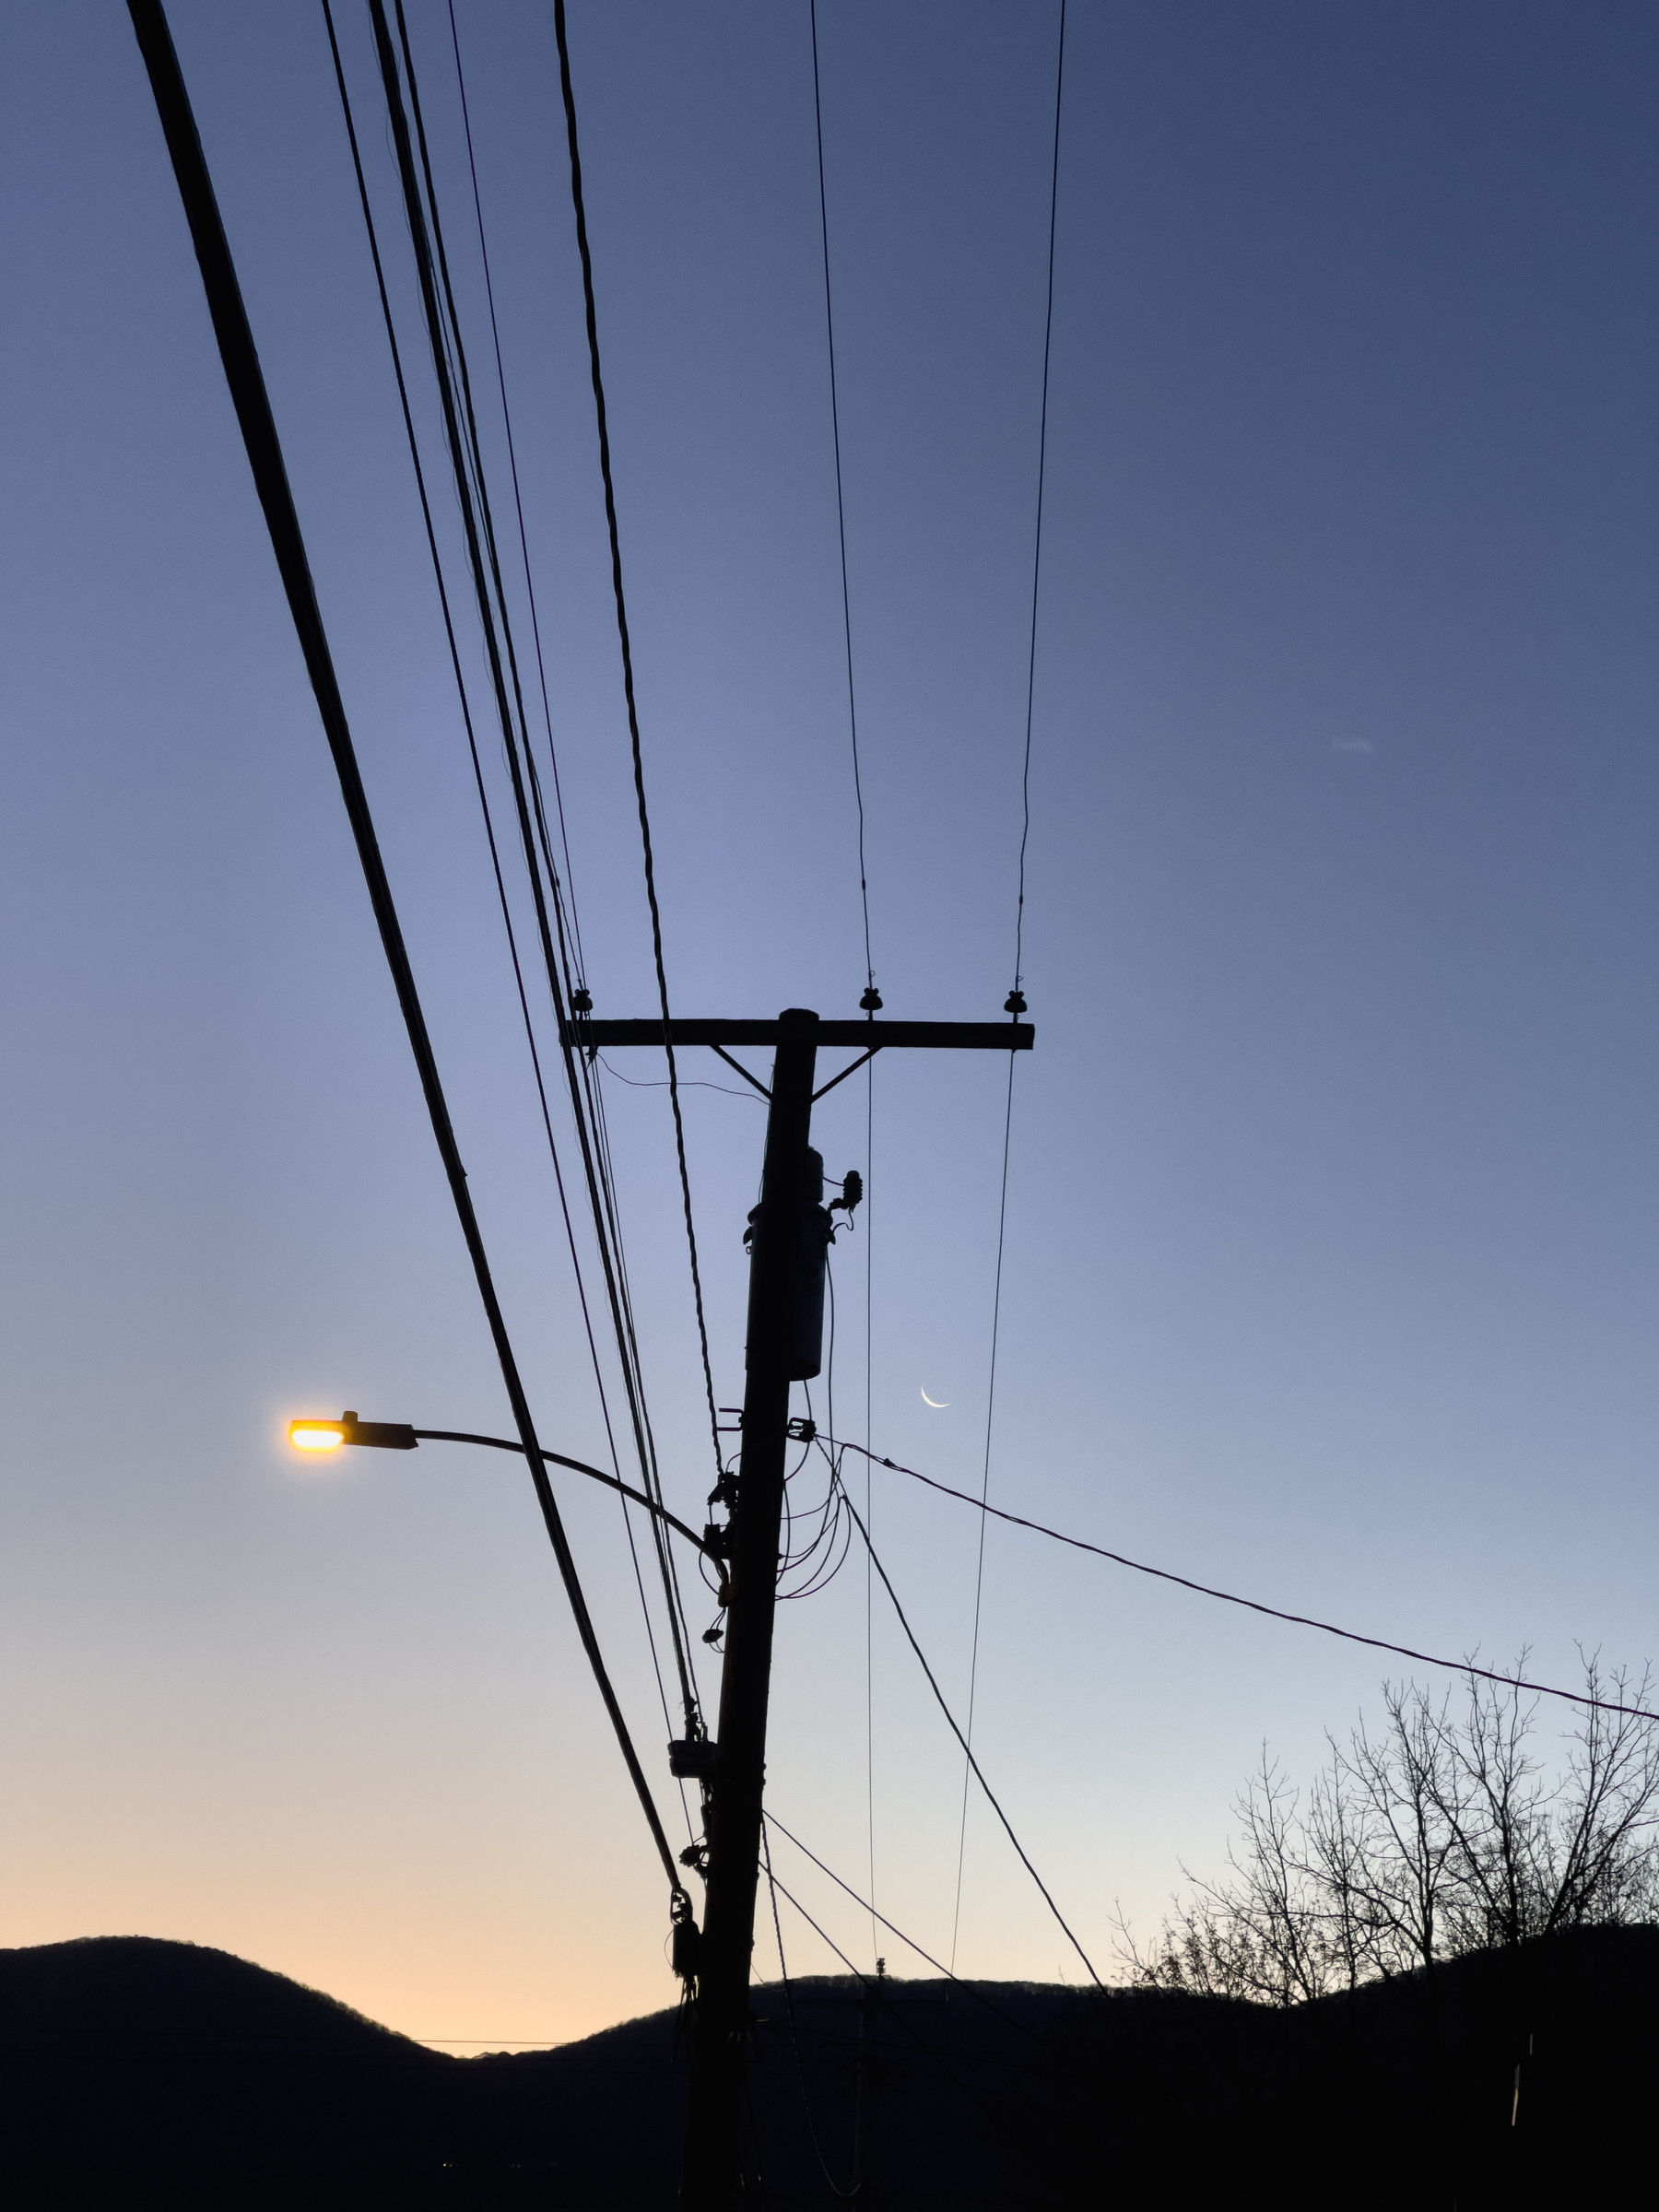 Utility pole in shape of cross with streetlight and wires, sliver moon visible between wires, mountain silhouettes in background at bottom of frame. 